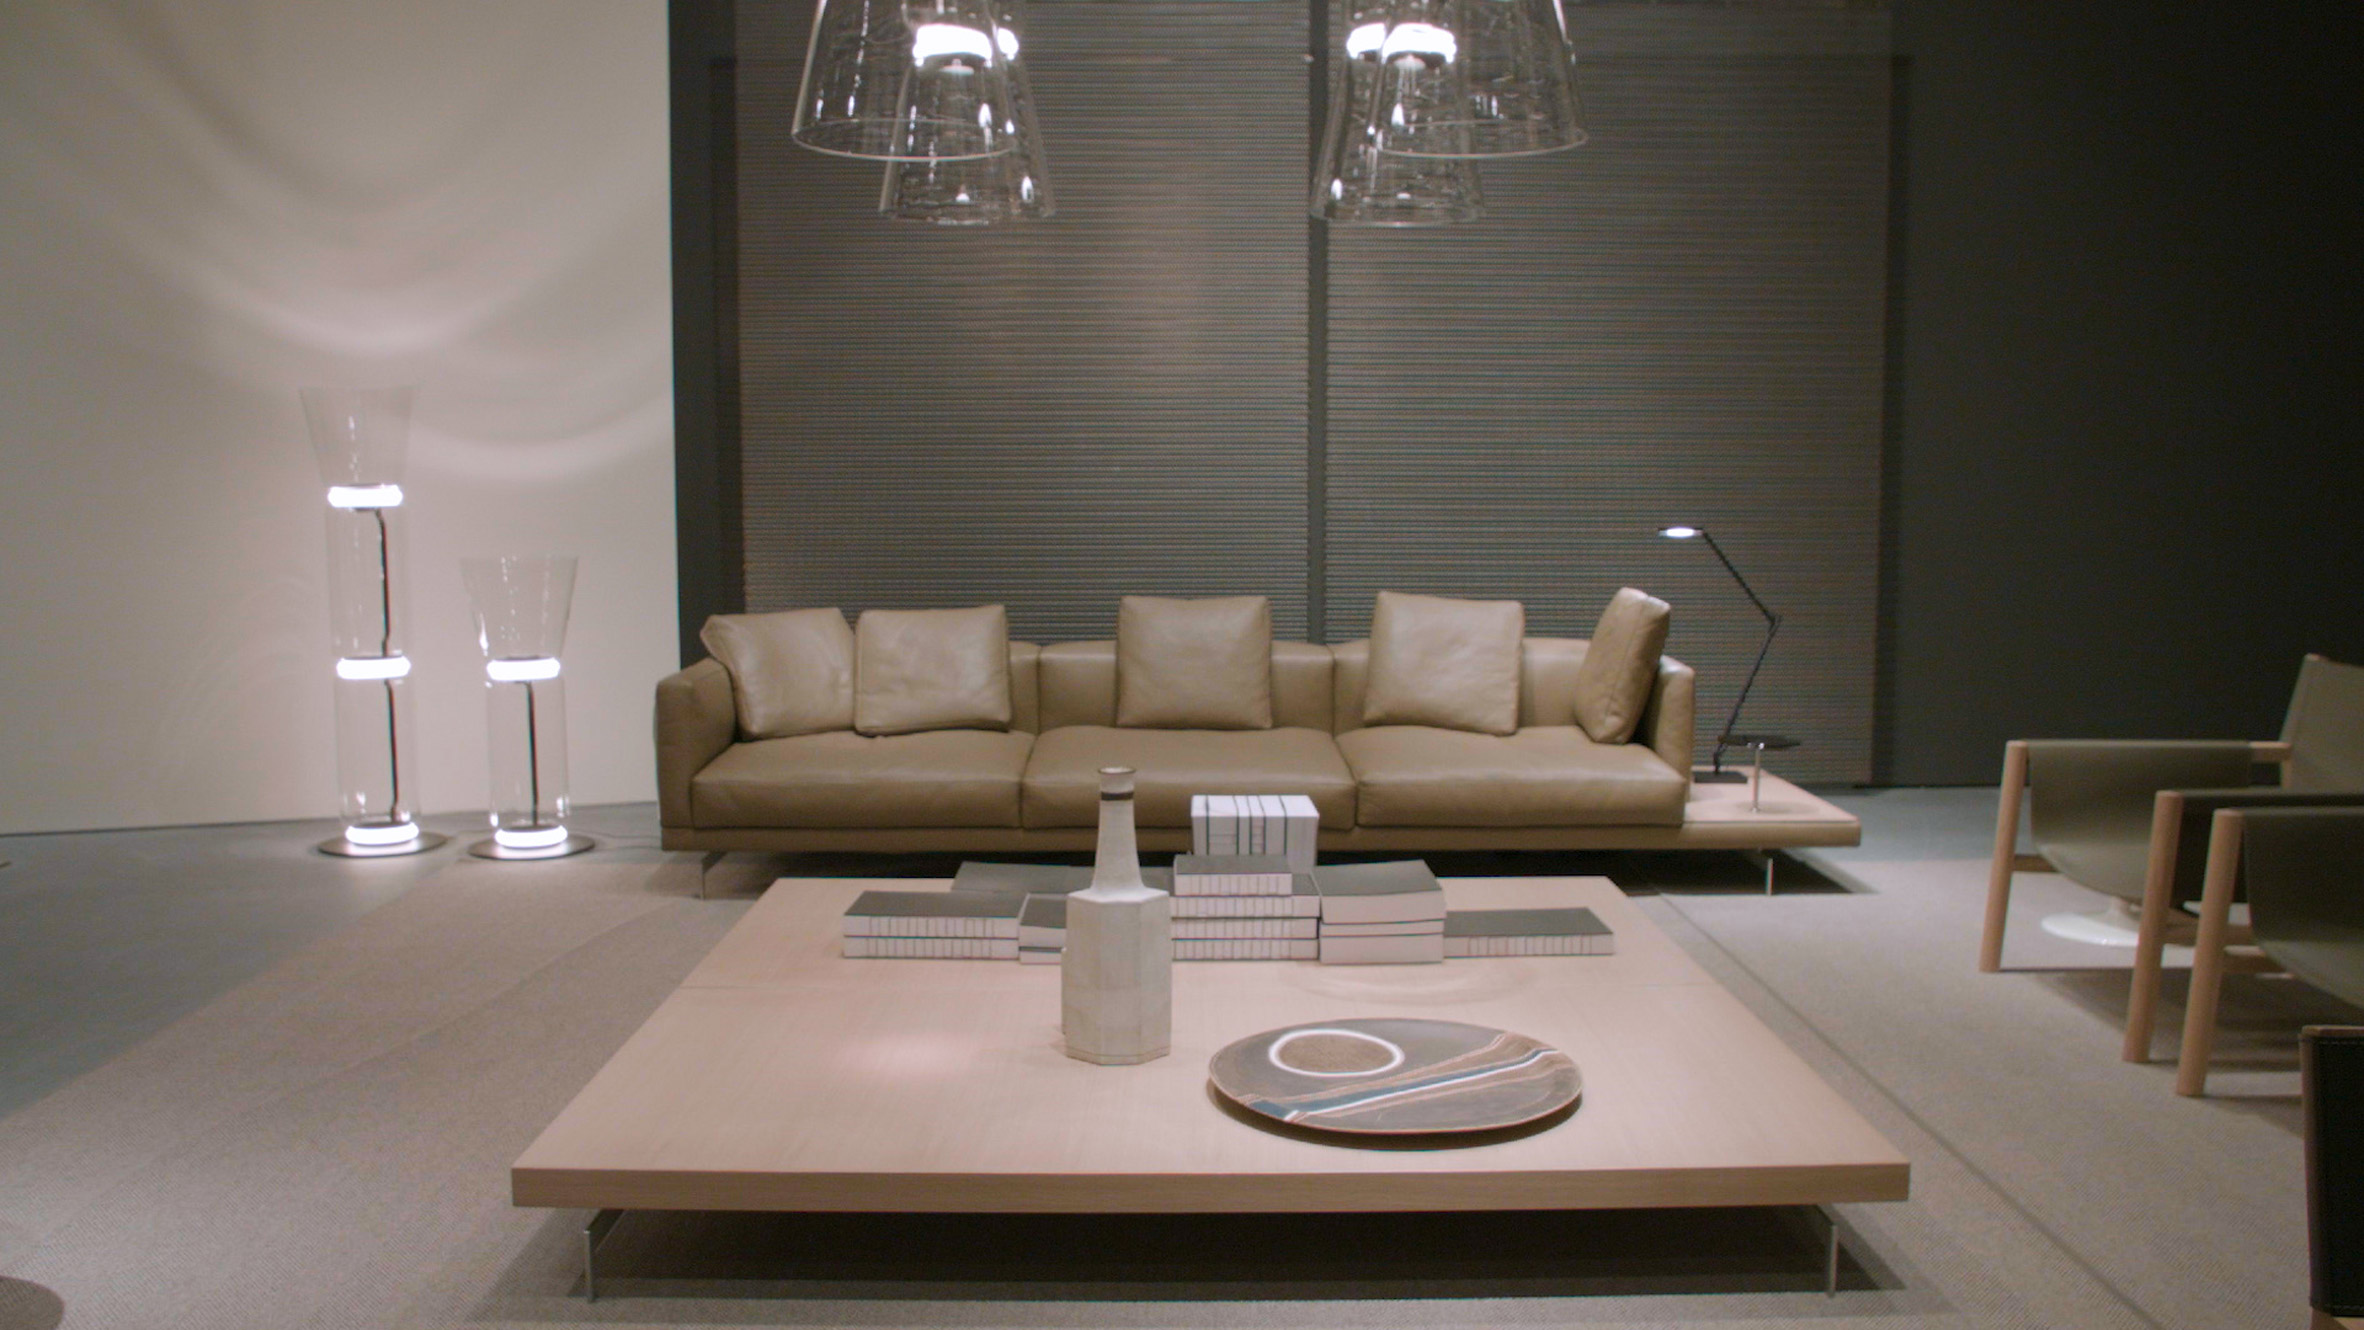 Watch our talk with Piero Lissoni live from New York